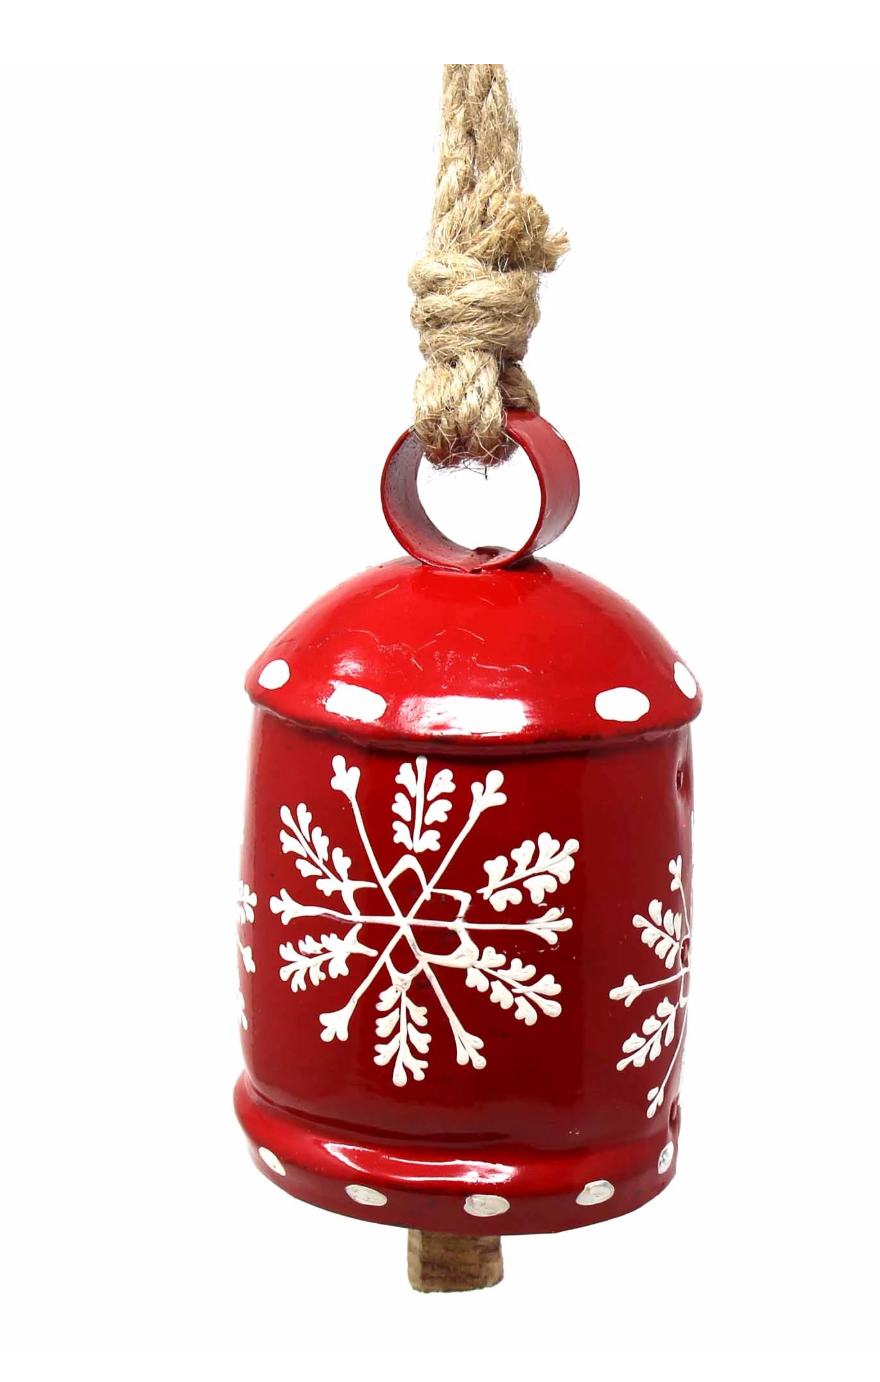 Recycled Red/White Snowflake Bell - CJ Gift Shoppe